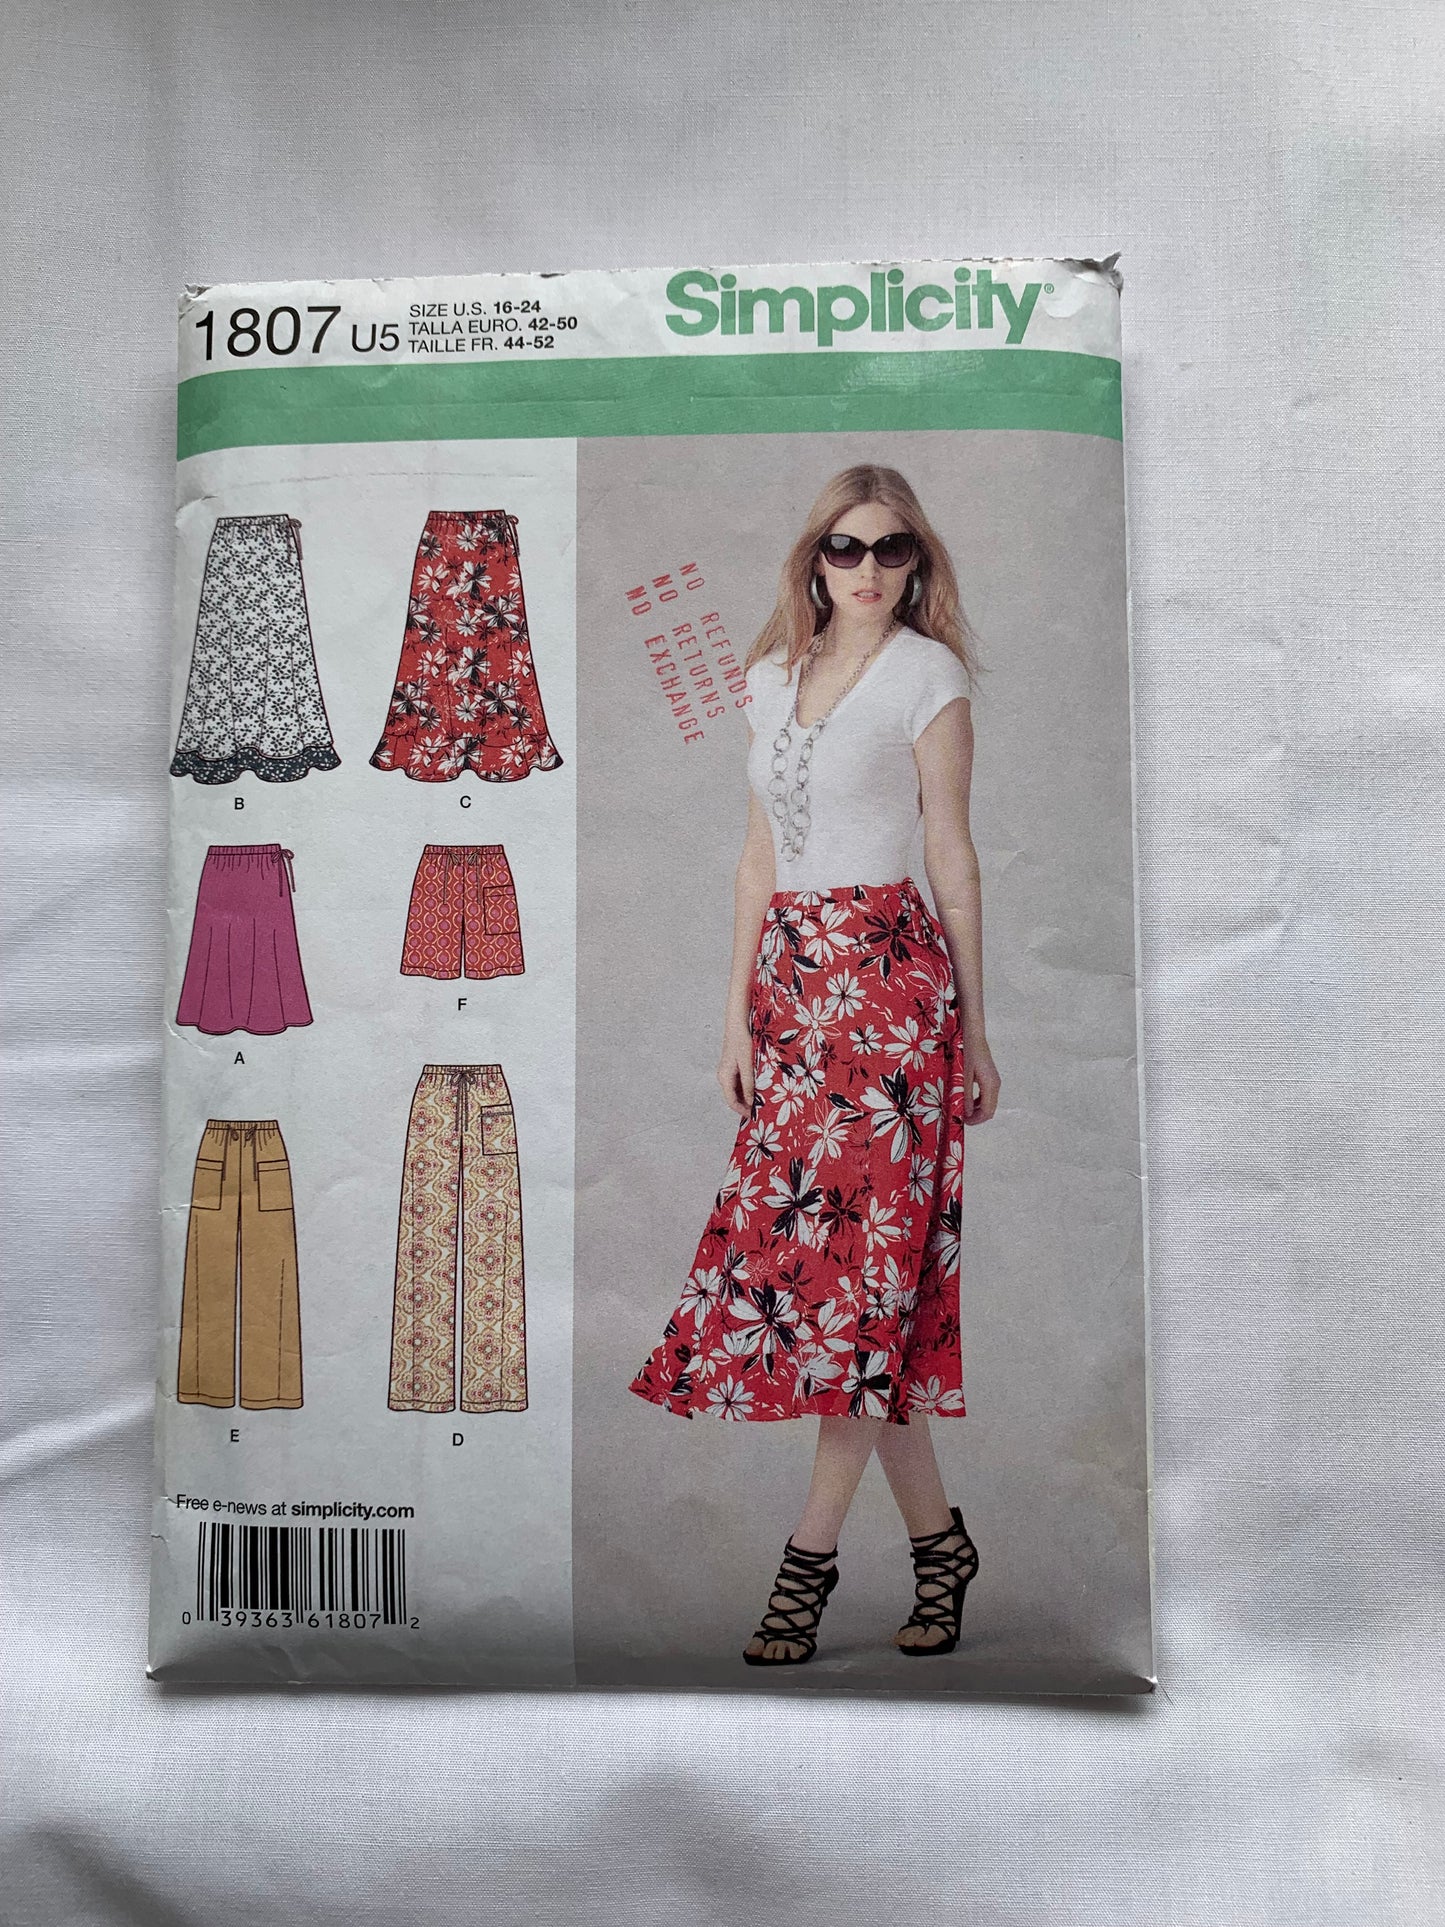 Slim Pants, Capris and Skirt Sewing Patterns for Misses Women Size 16 18 20  22, Six Bottoms Made Easy Karen Z Simplicity 5259 